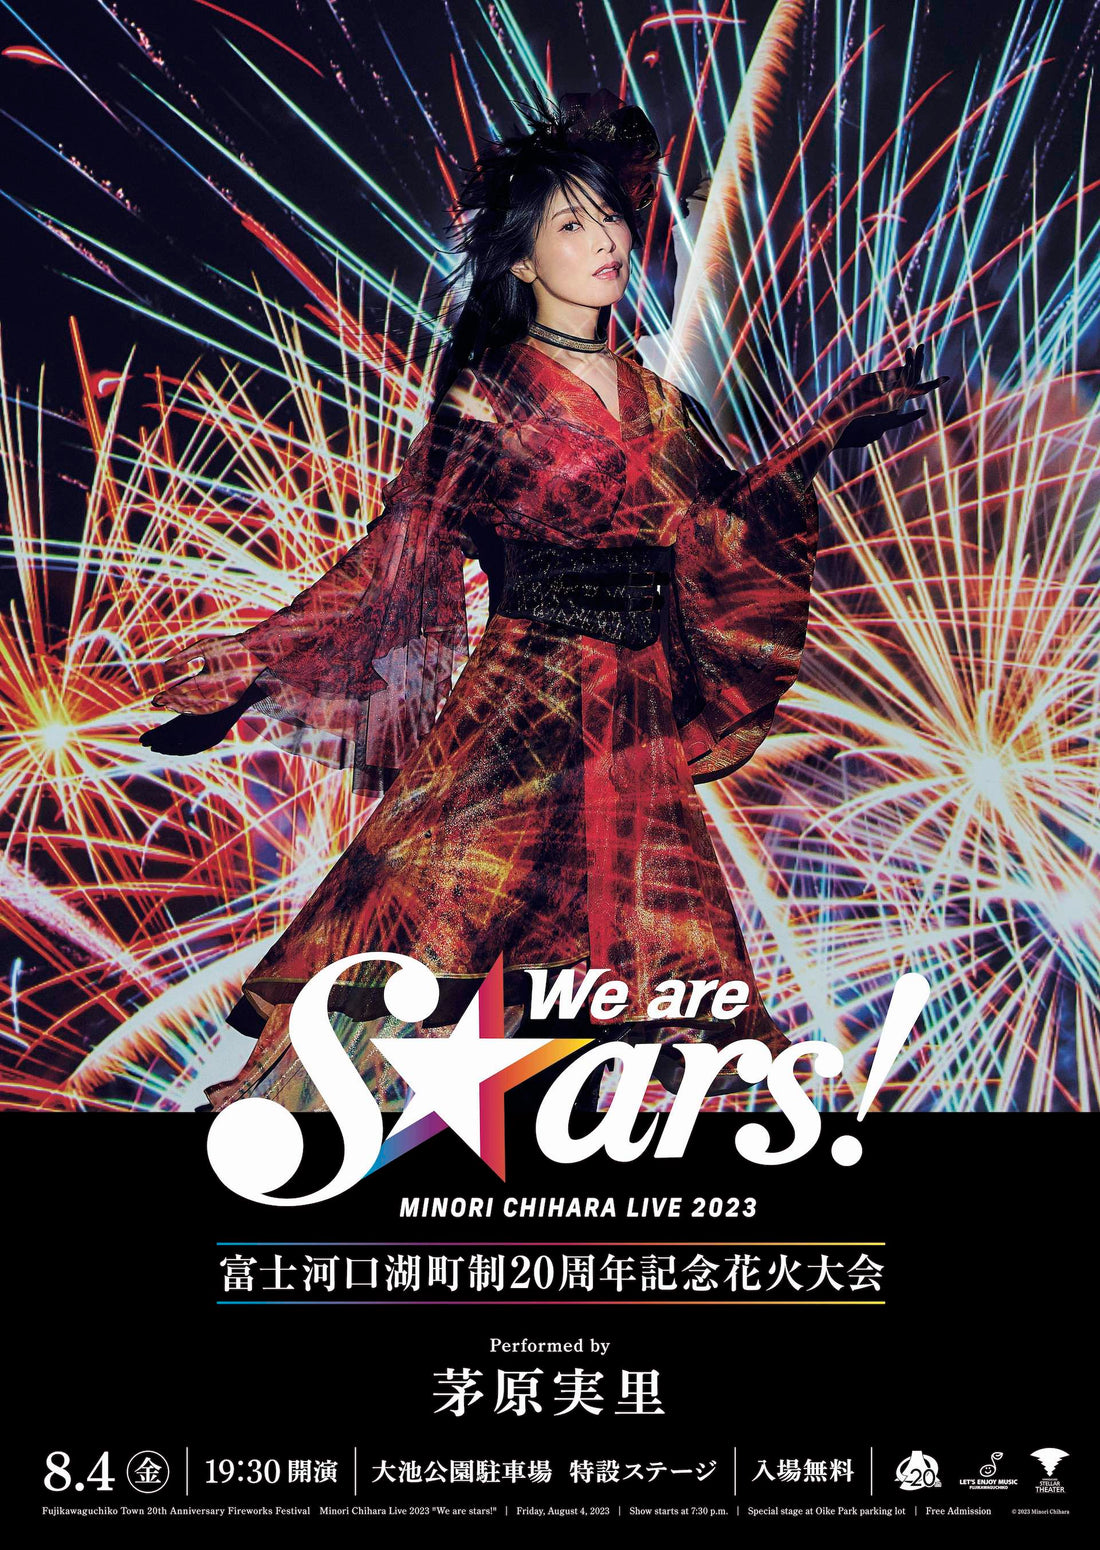 "We are stars!" 臨時駐車場のご案内